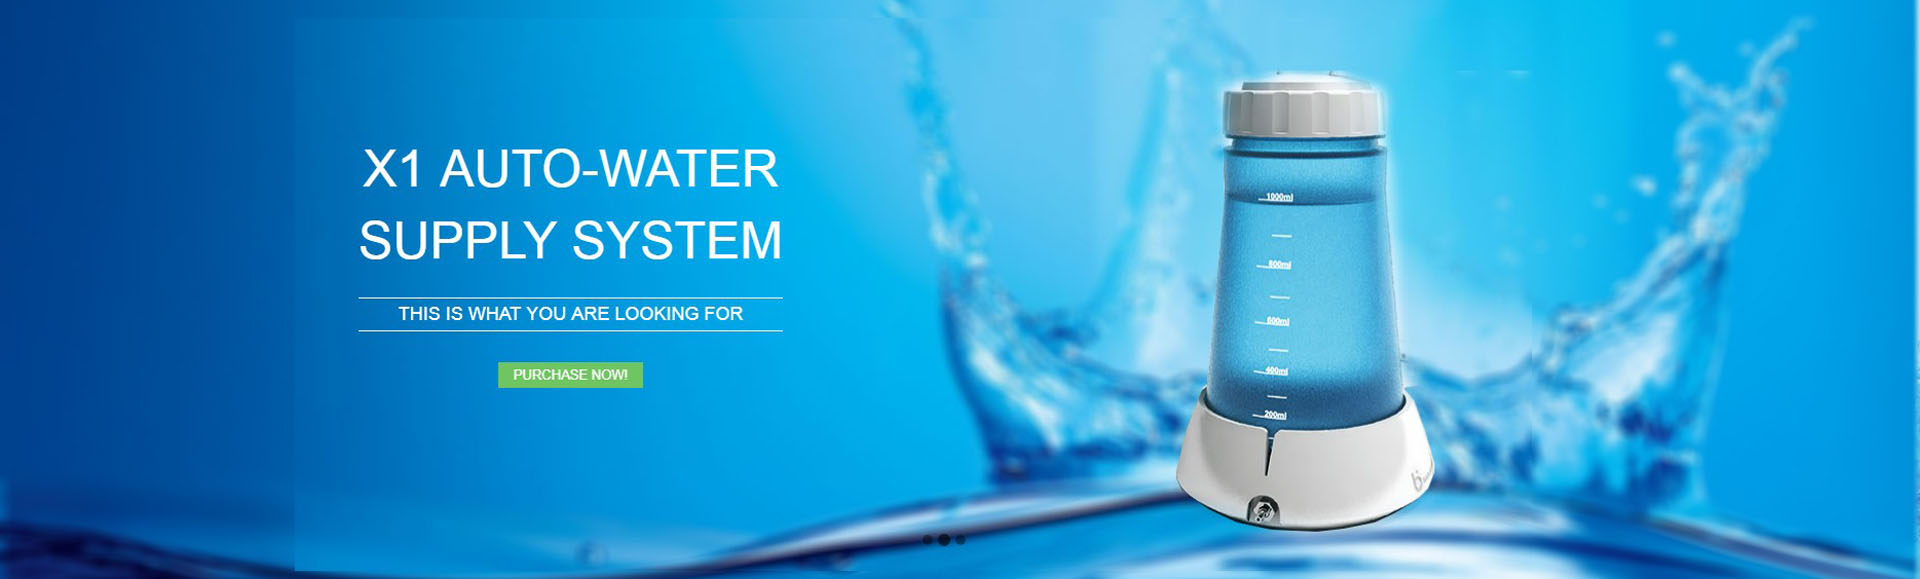 X1 auto water supply system13